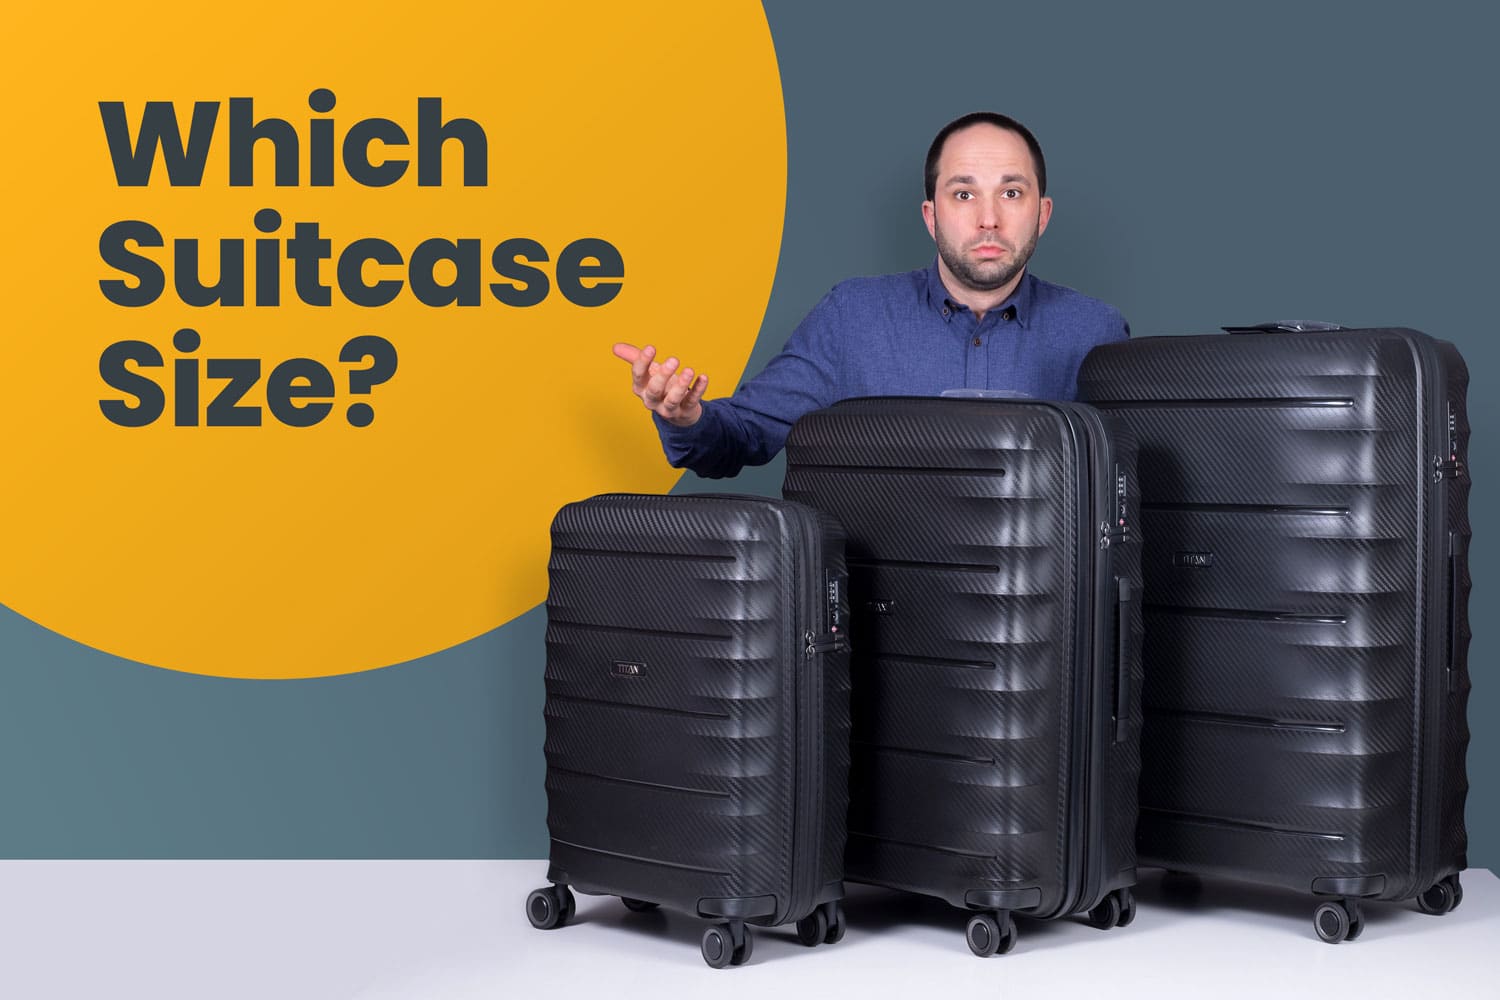 Which Suitcase Material is the Best?